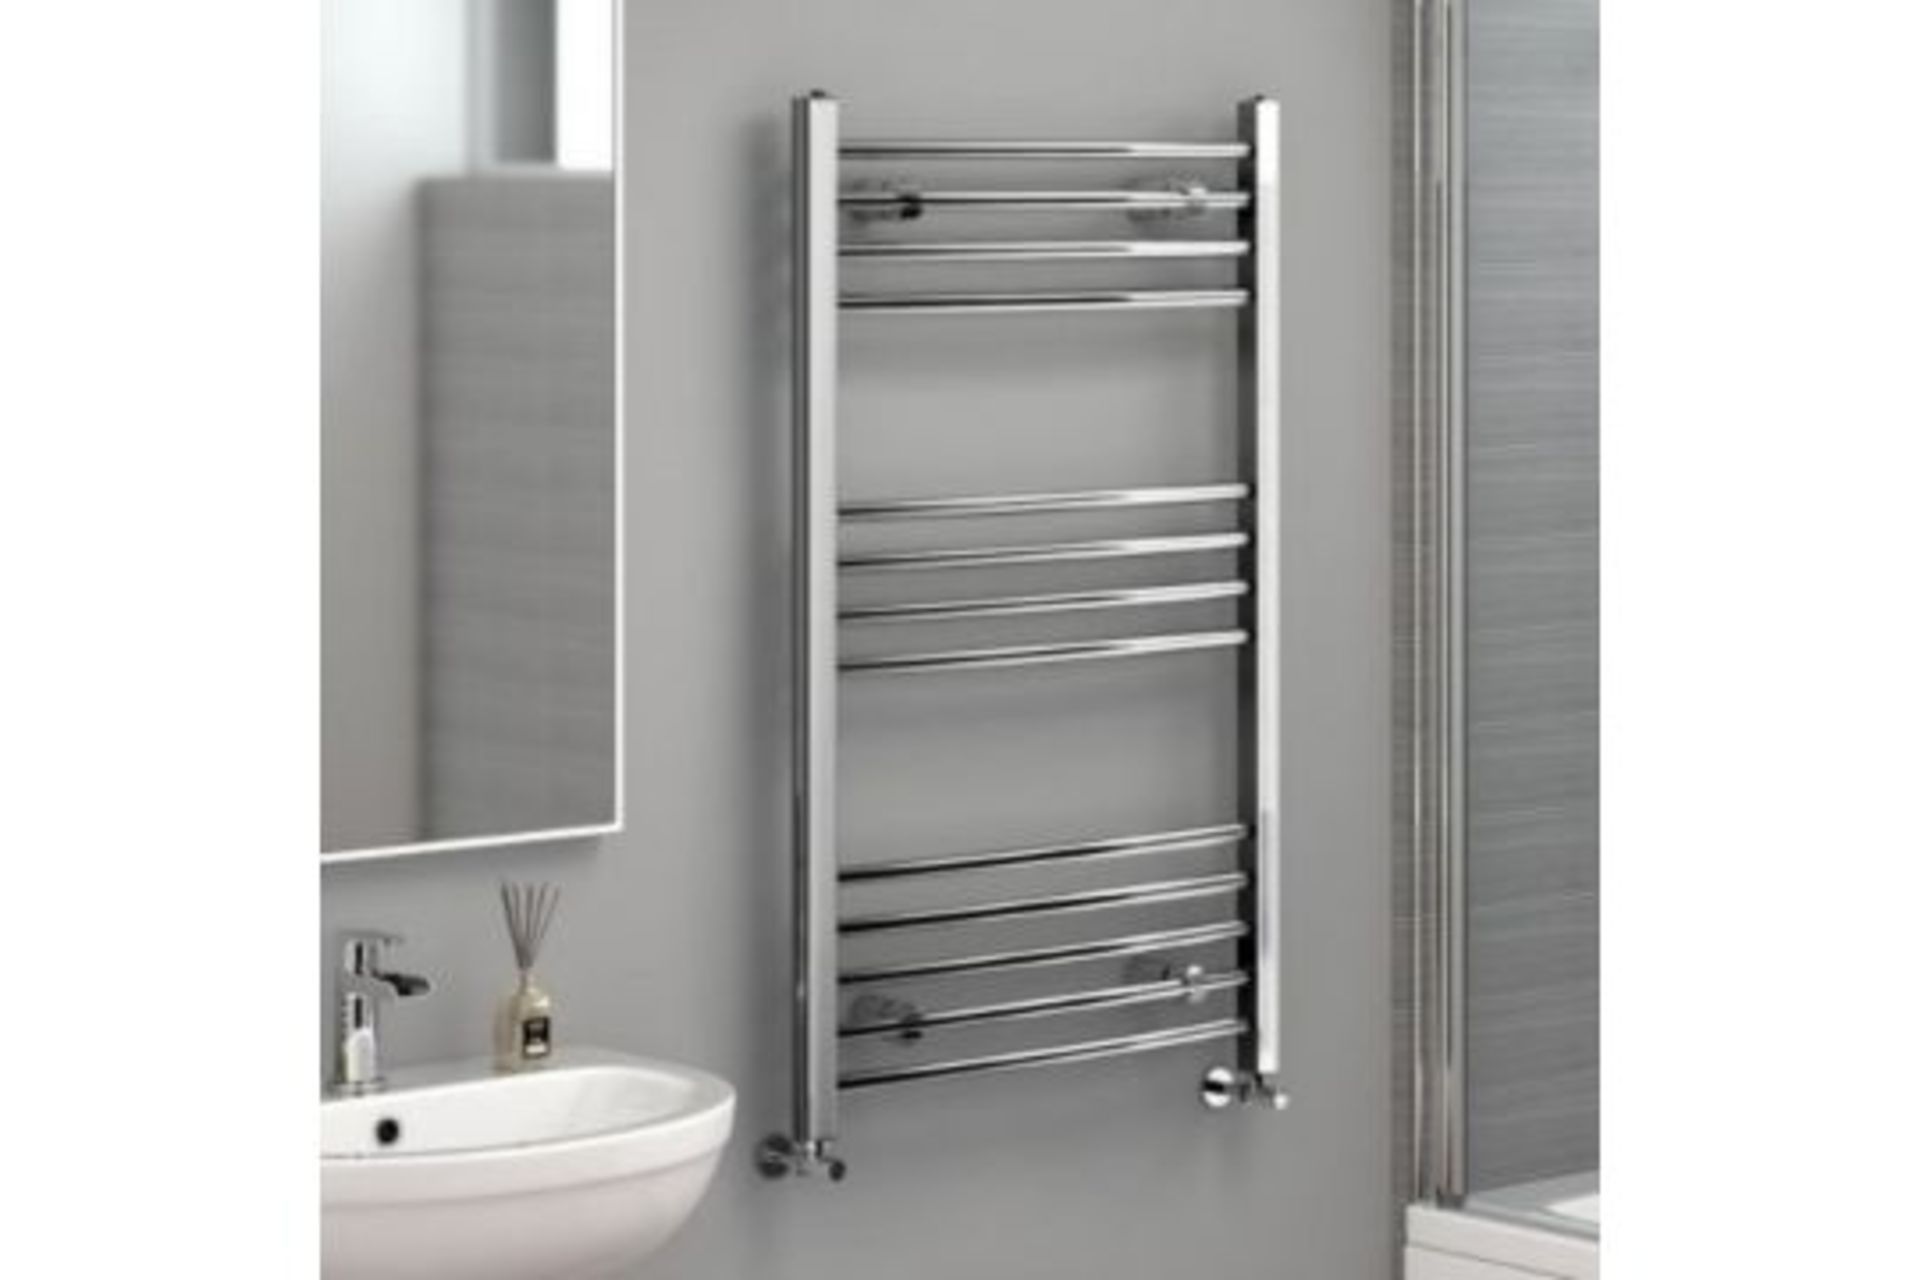 NEW & BOXED 1200x500mm - 20mm Tubes - RRP £219.99.Chrome Curved Rail Ladder Towel Radiator.Our Nancy